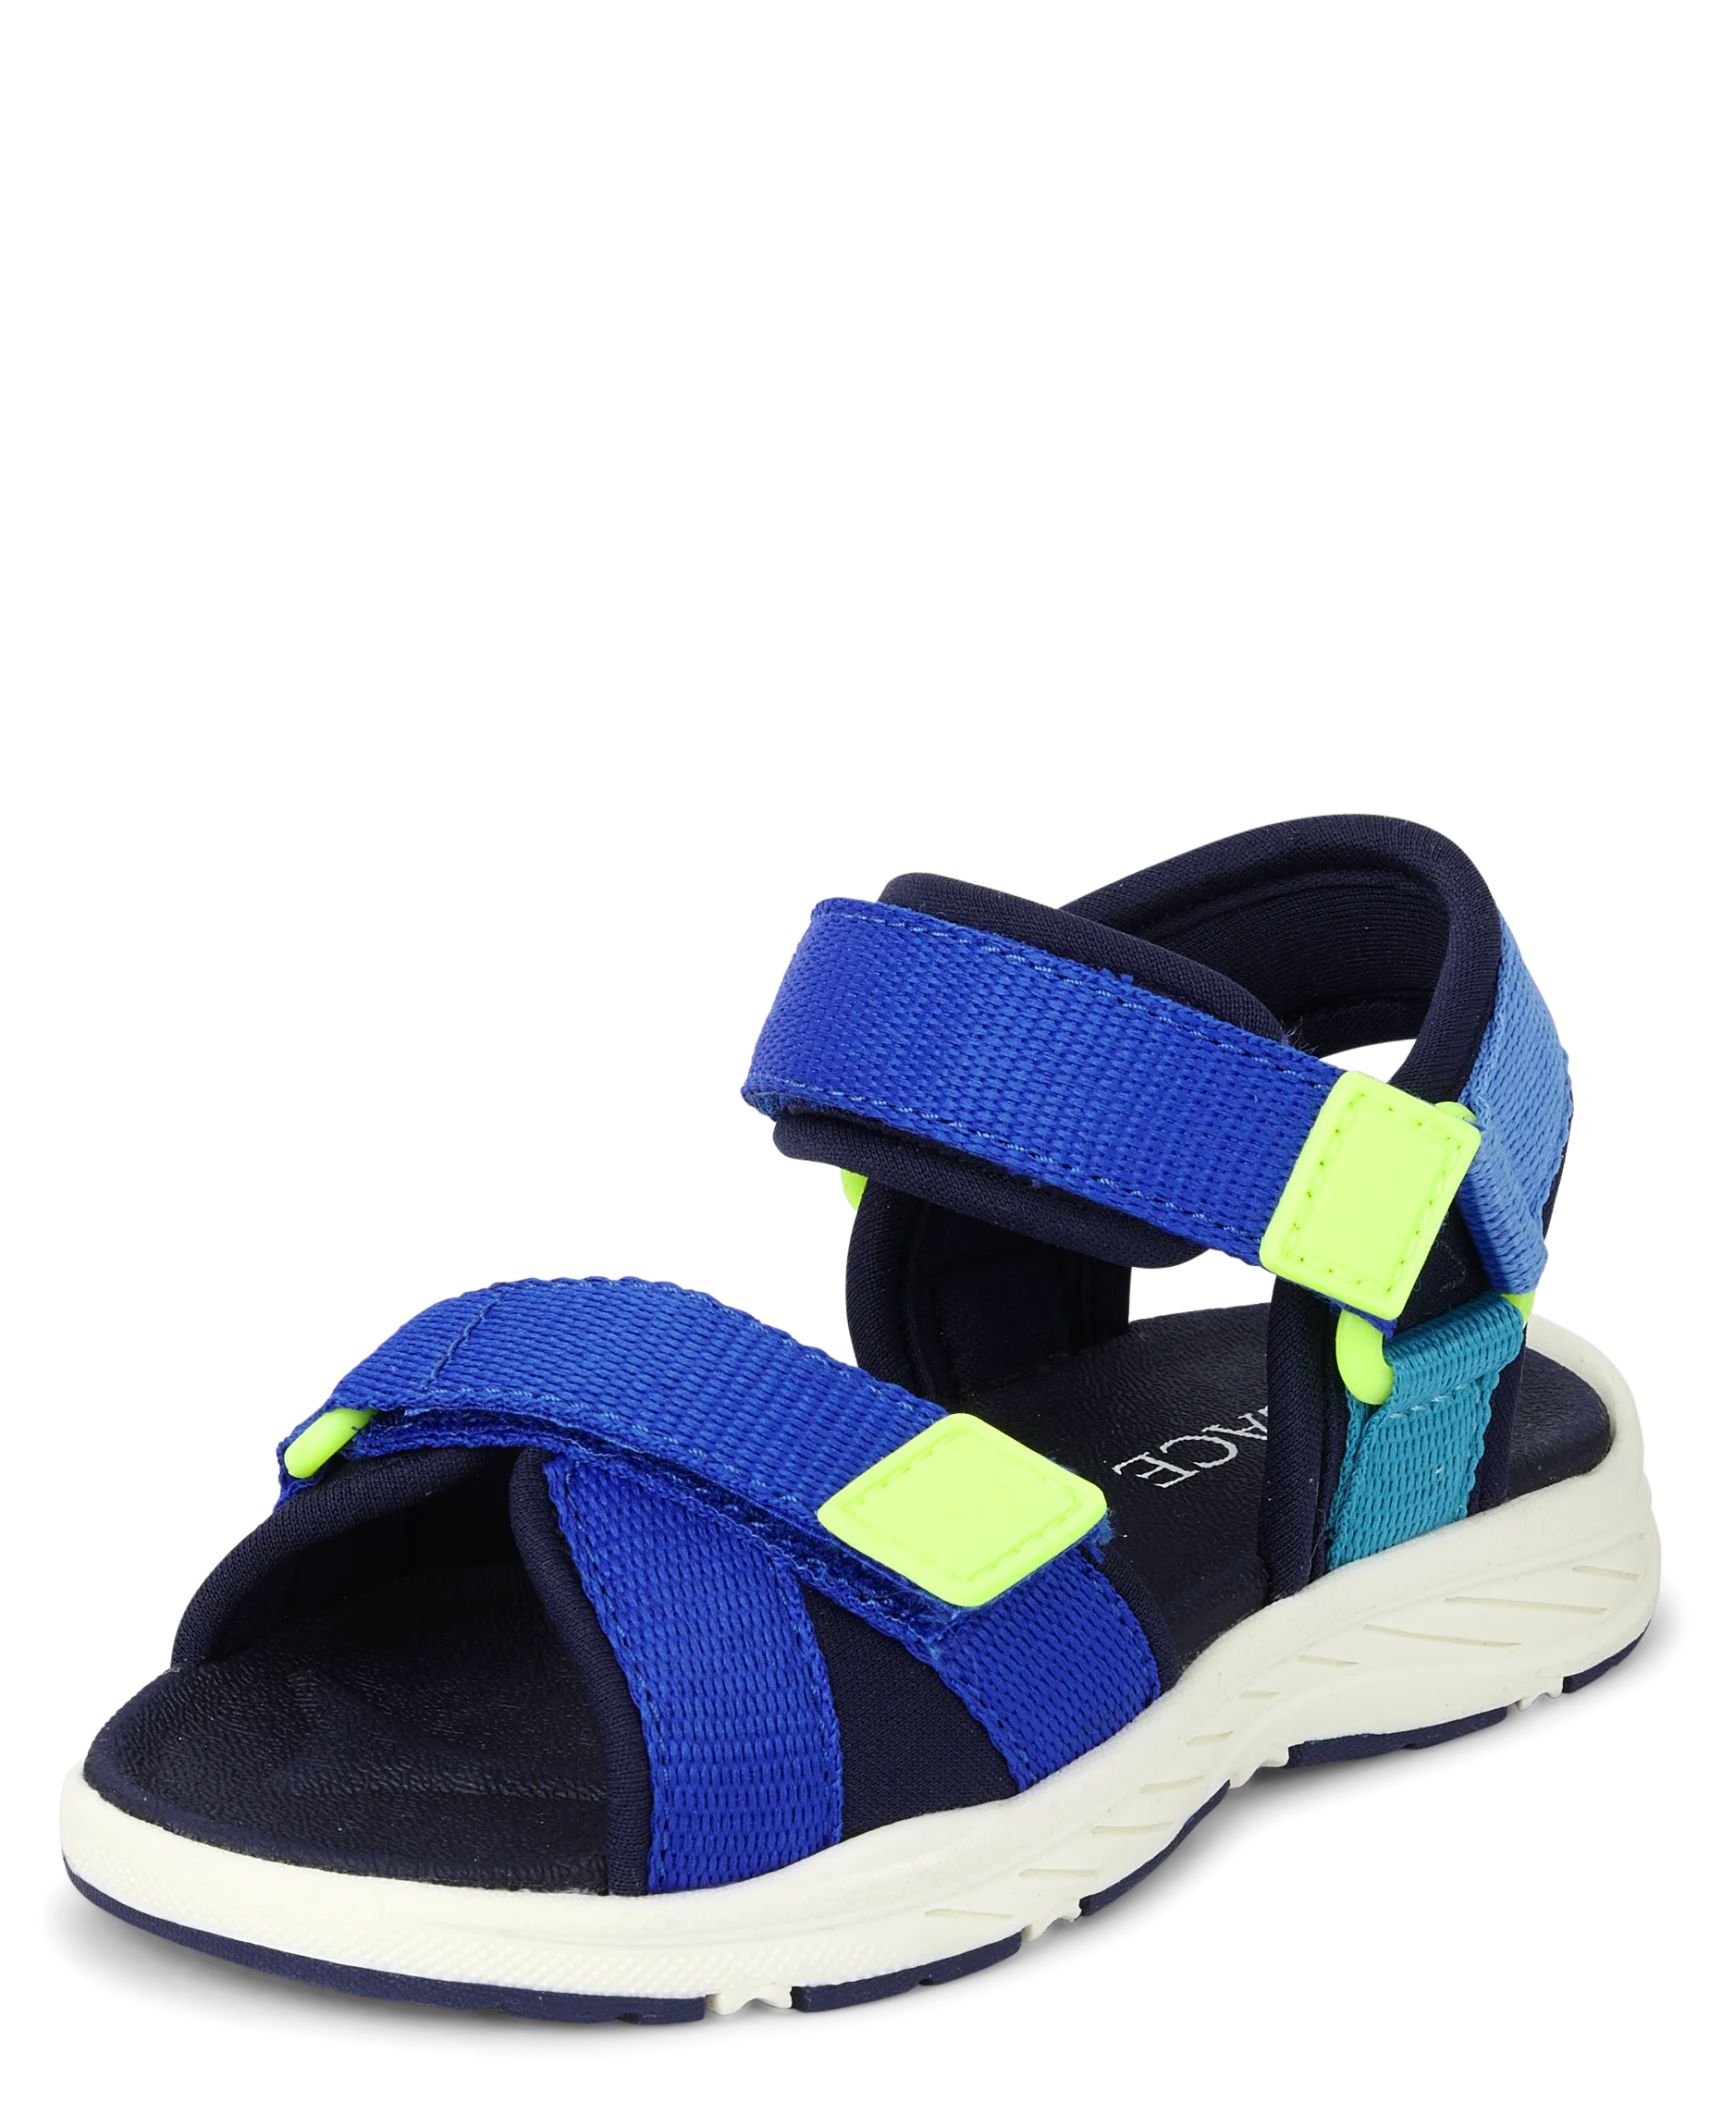 Toddler Boys Colorblock Webbed Sandals | The Children's Place  - MULTI CLR | The Children's Place